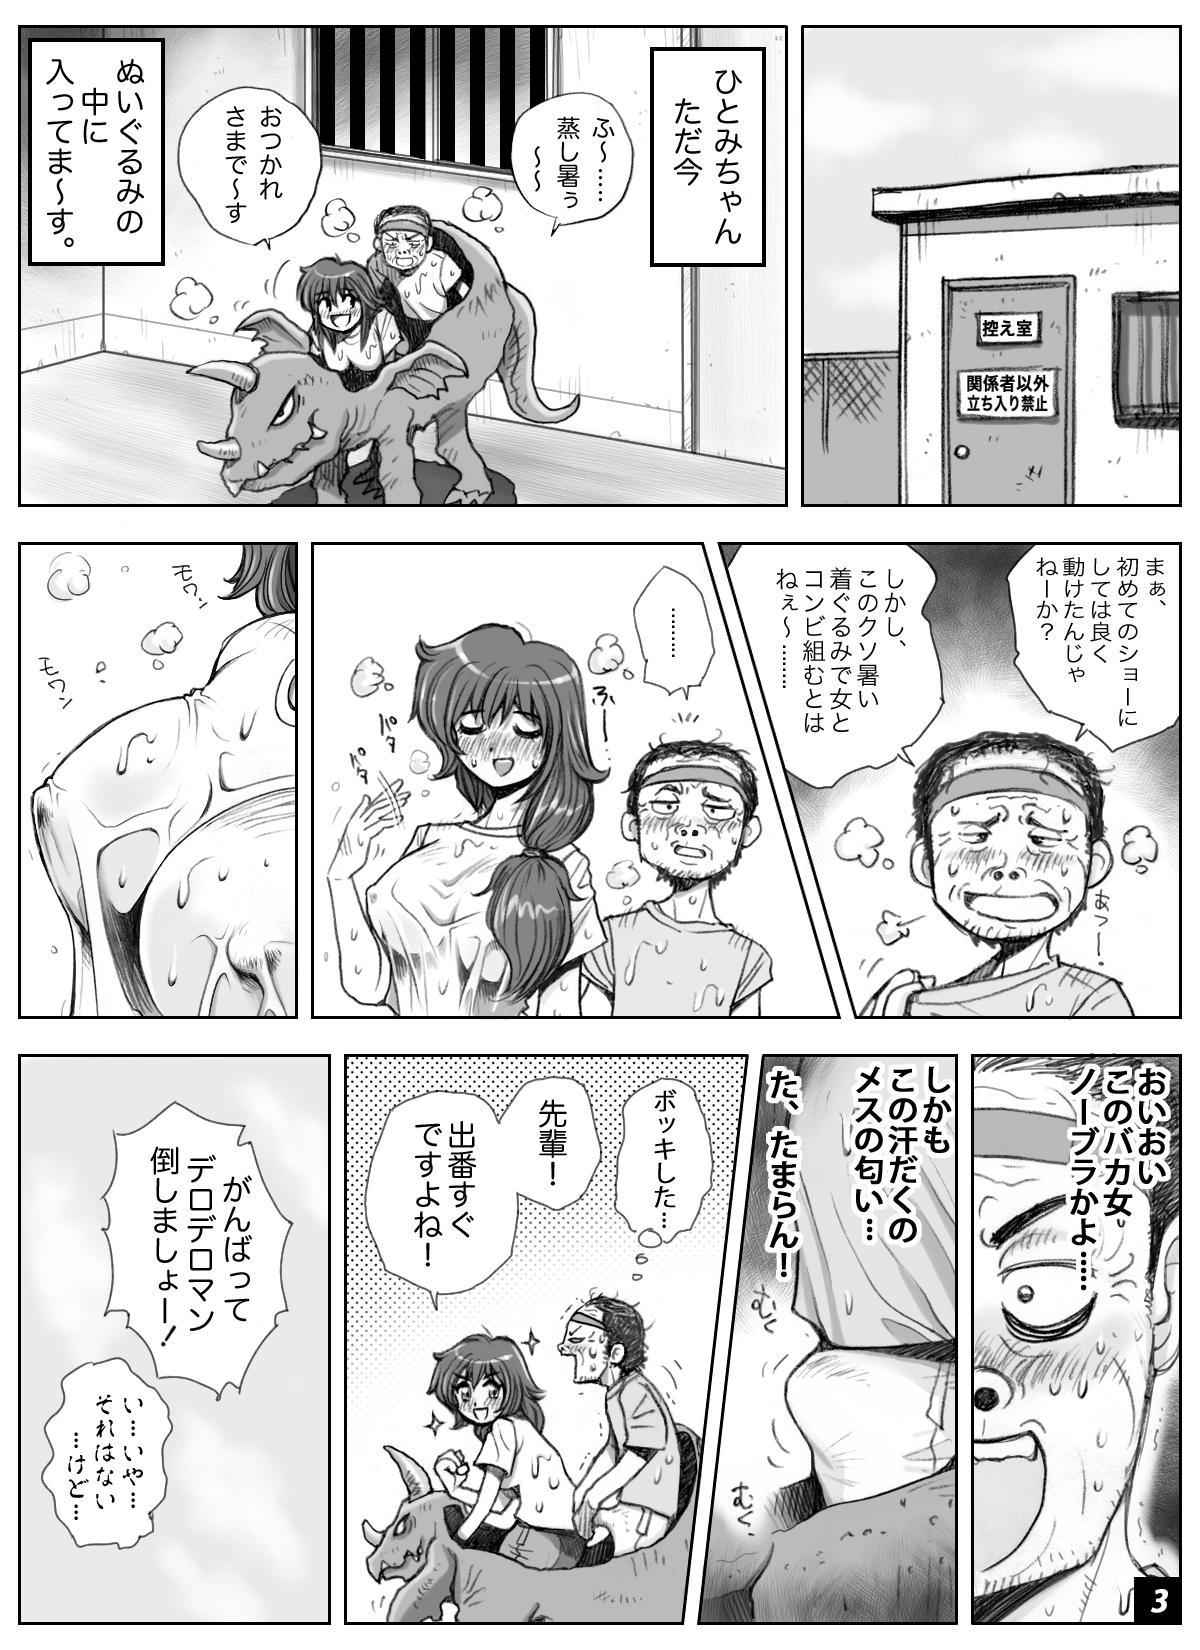 Spanish ikeikeフリーター ひとみちゃん Vol.6 Glasses - Page 3